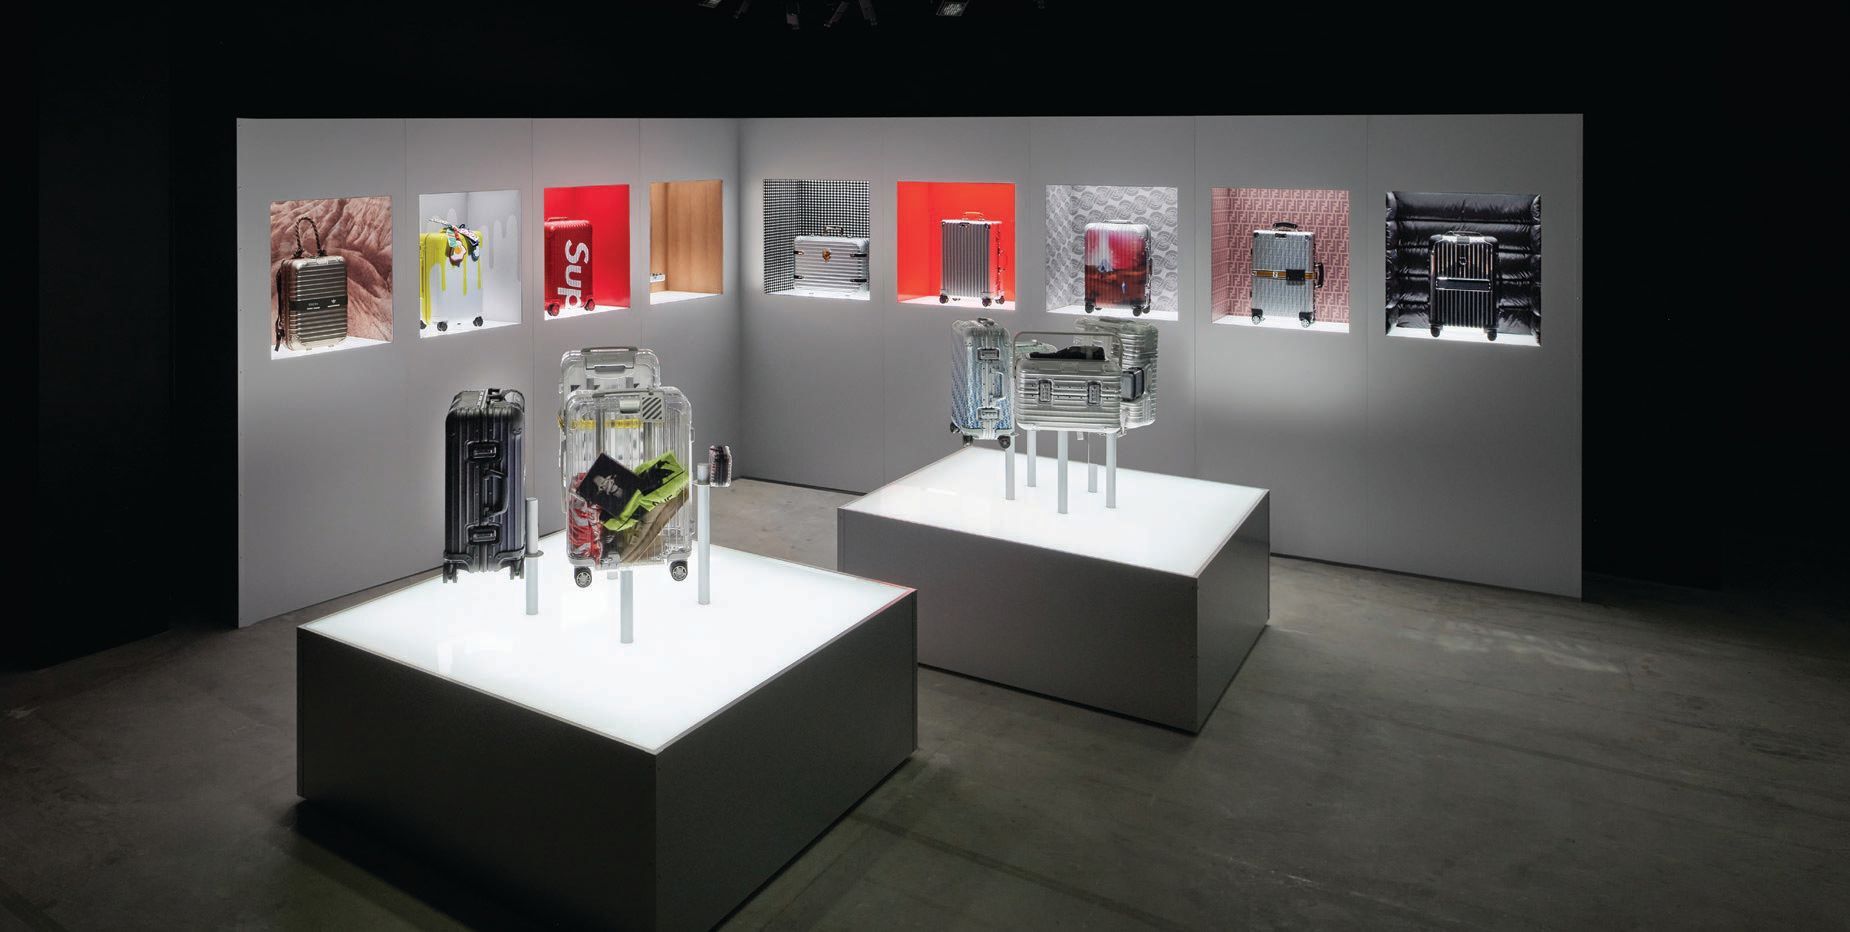 RIMOWA’s many brand collabs on view PHOTO COURTESY OF RIMOWA FROM SEIT 1898 EXHIBITION